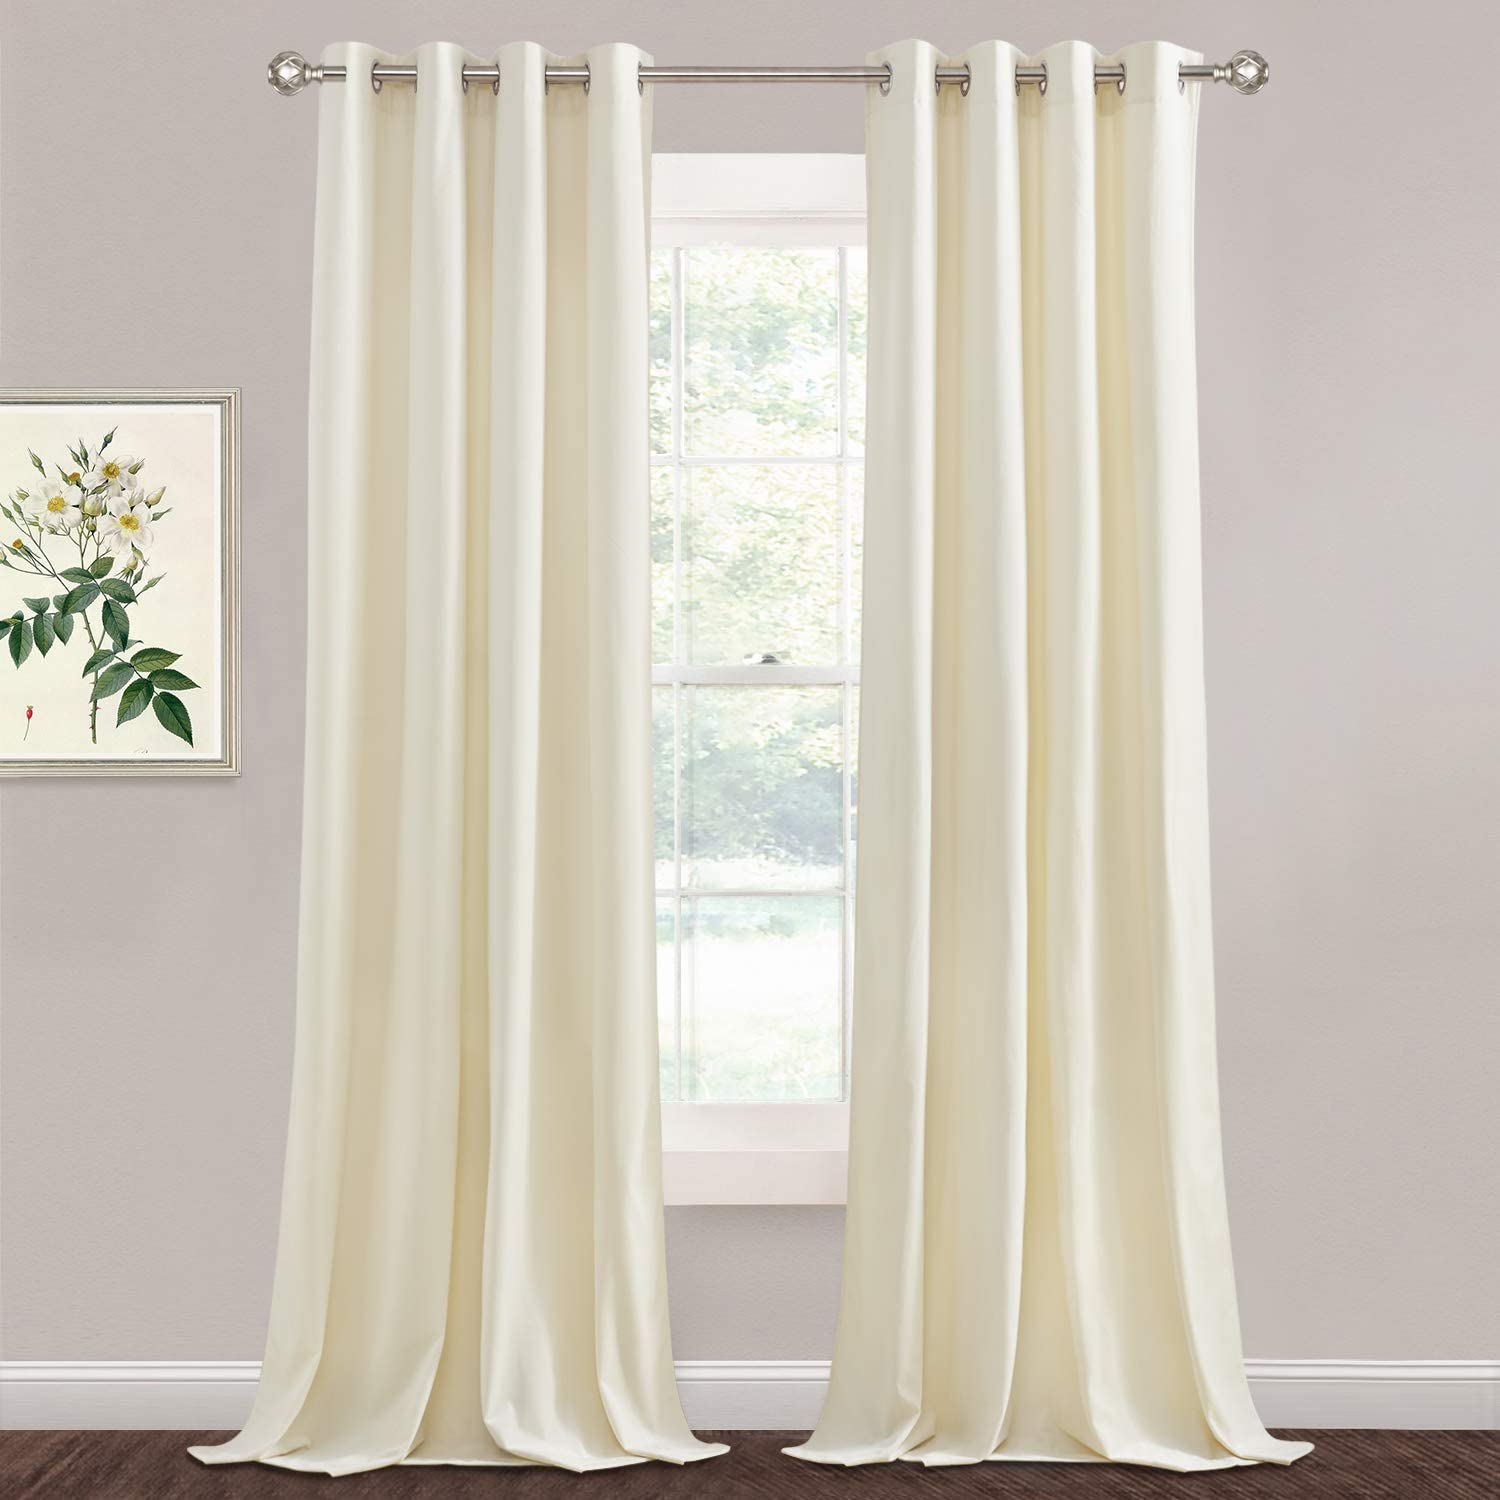 Clearance Silver Grommet Velvet Blackout Curtains For Living Room And Bedroom 2 Panels